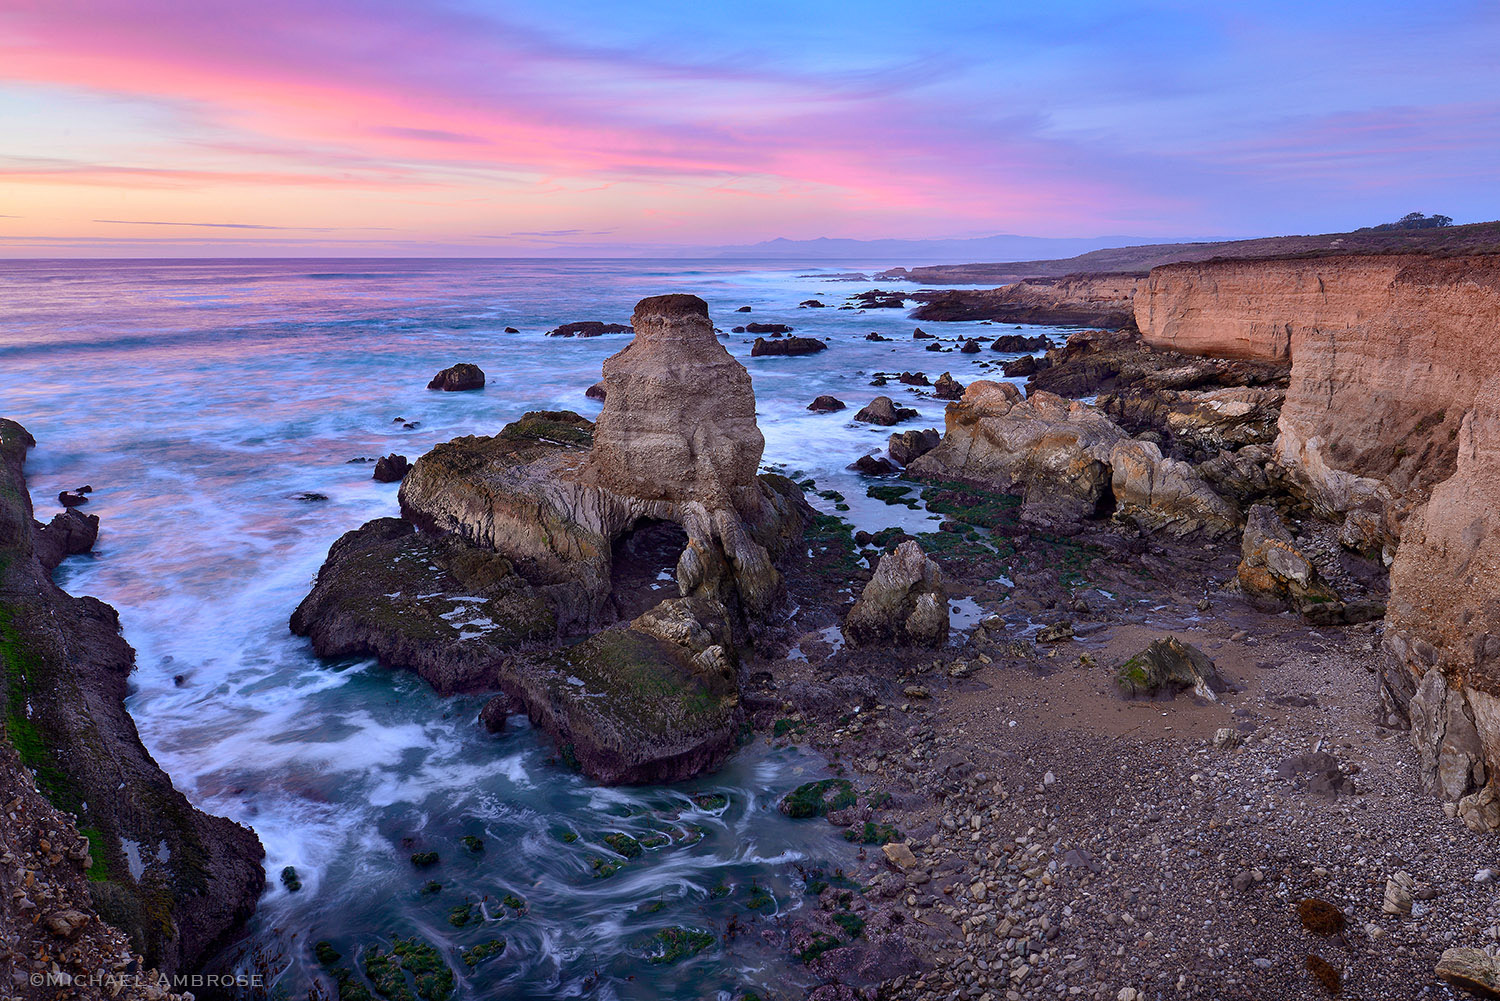 Evening sunset light paints the ocean and sky pink on the rocky cliffs of Montana de Oro State Park on the beautiful California coast.